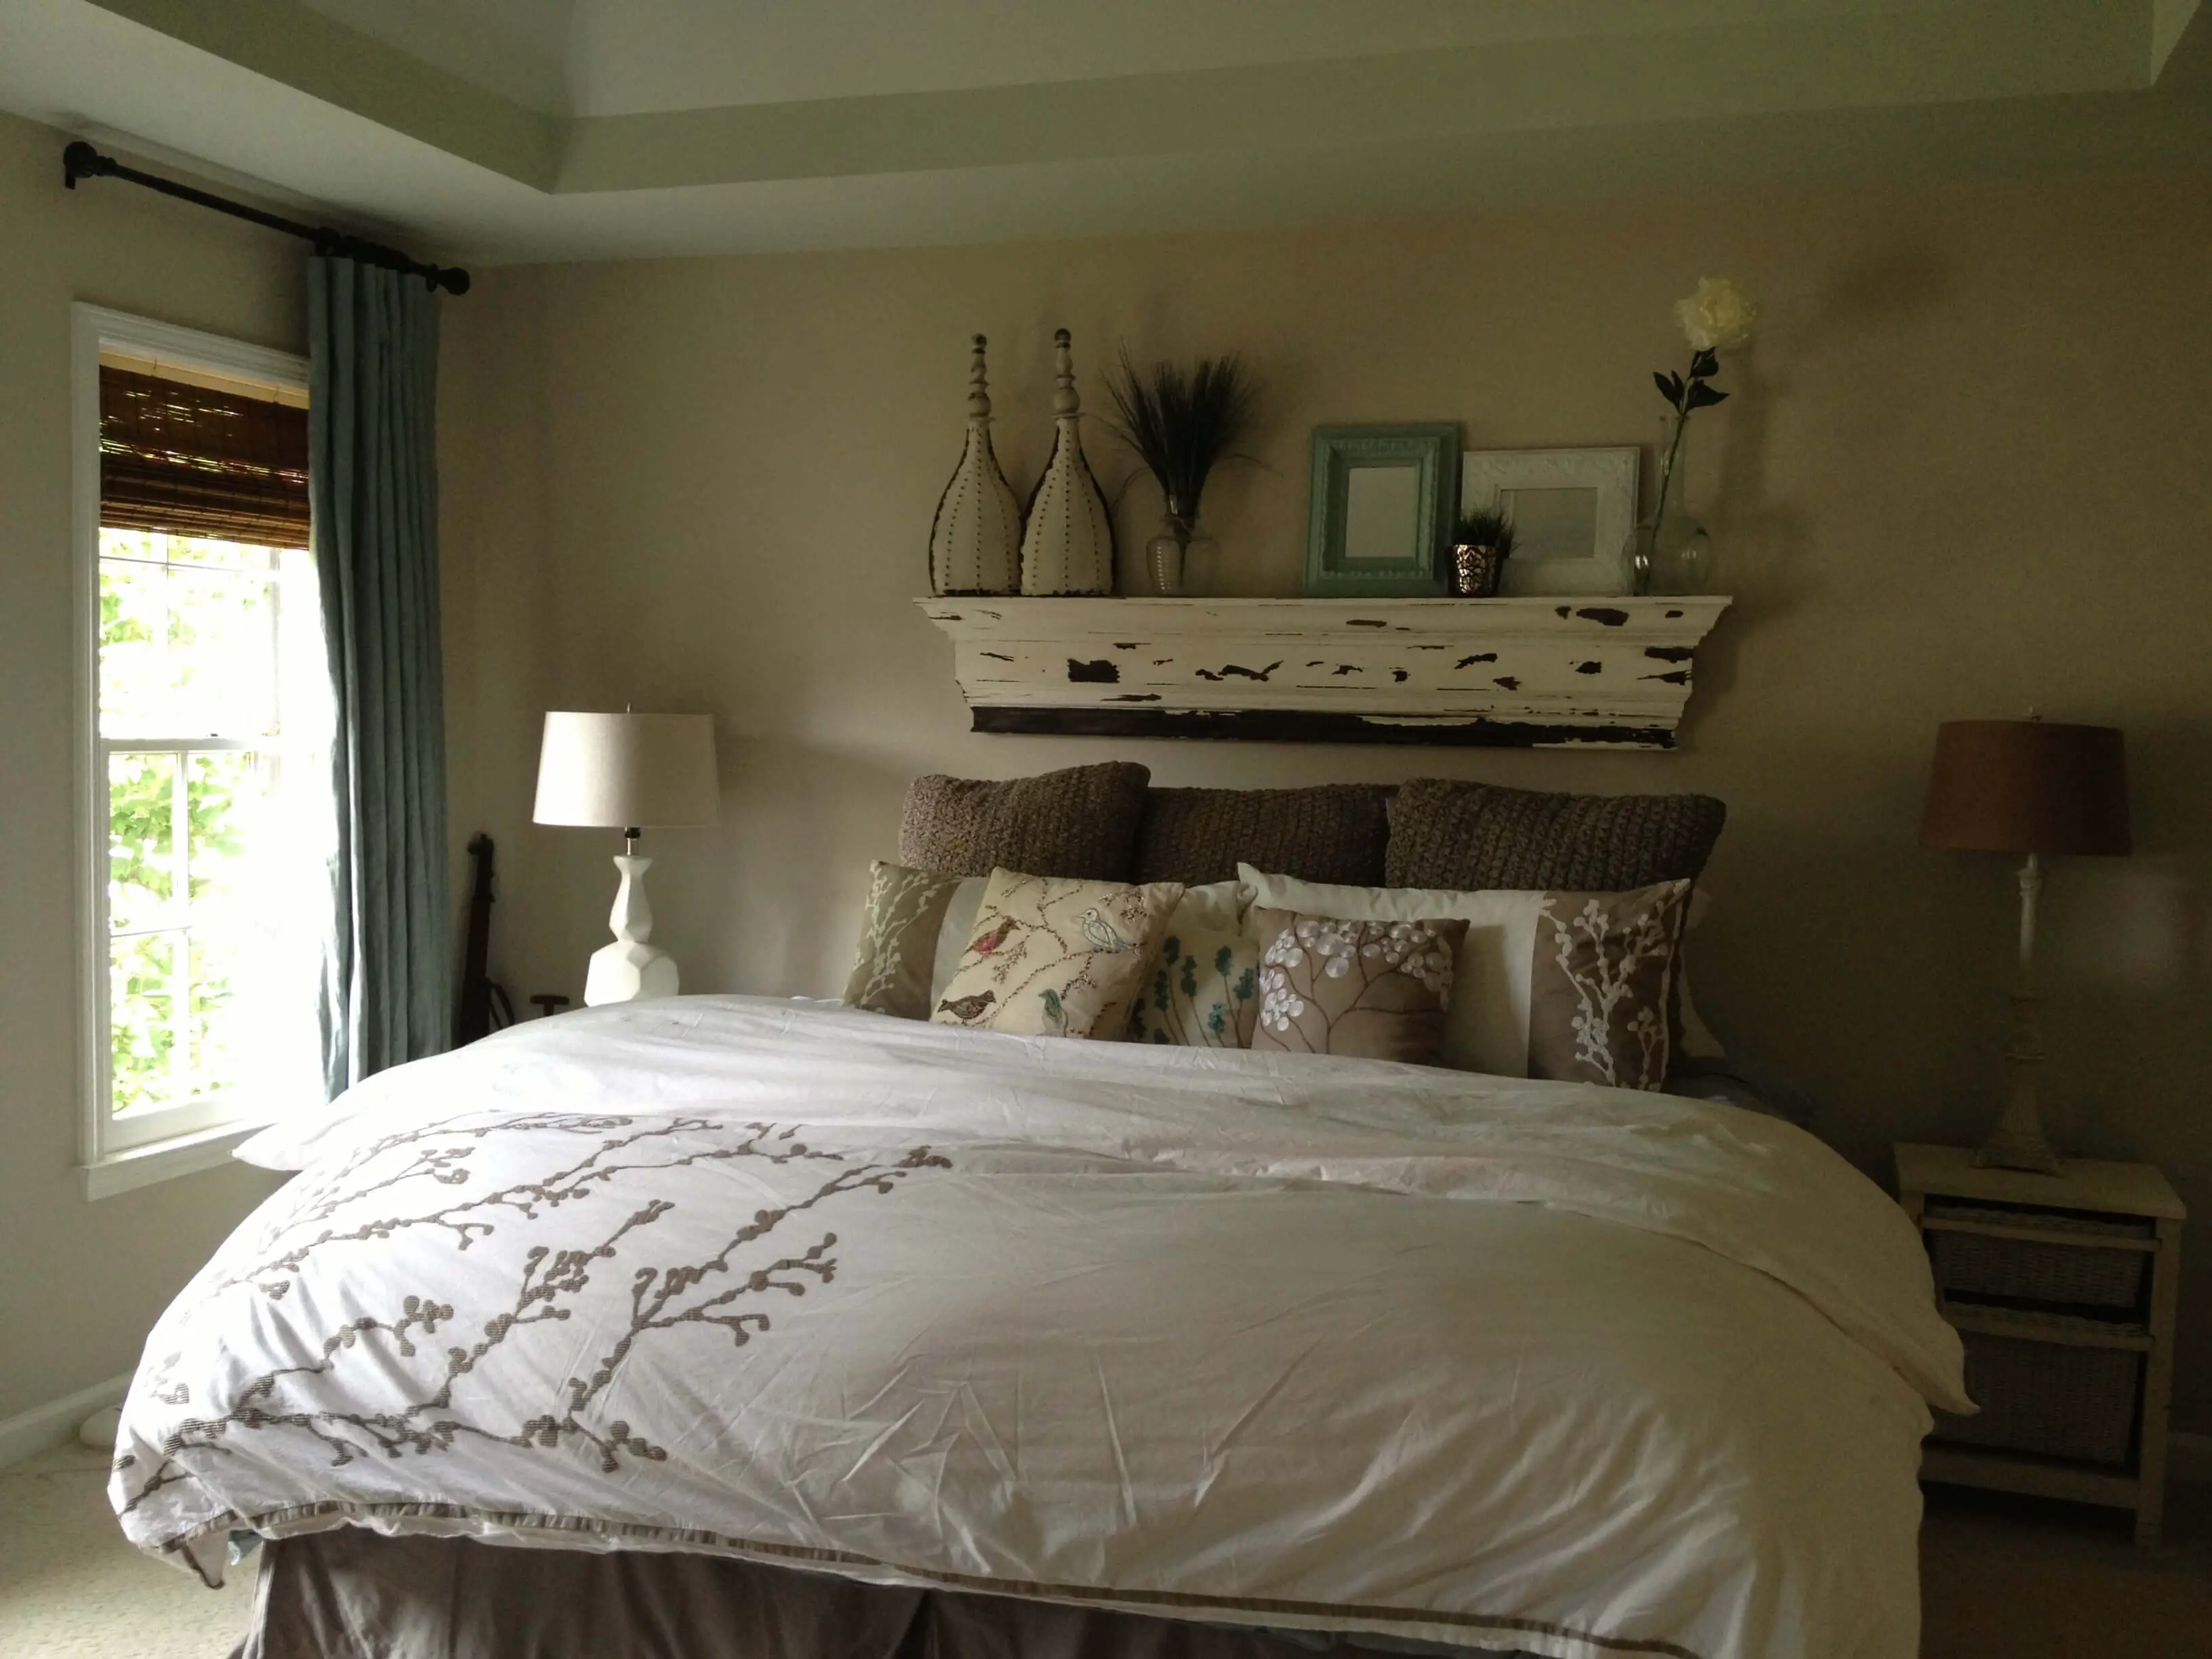 Bedrooms Without Headboards